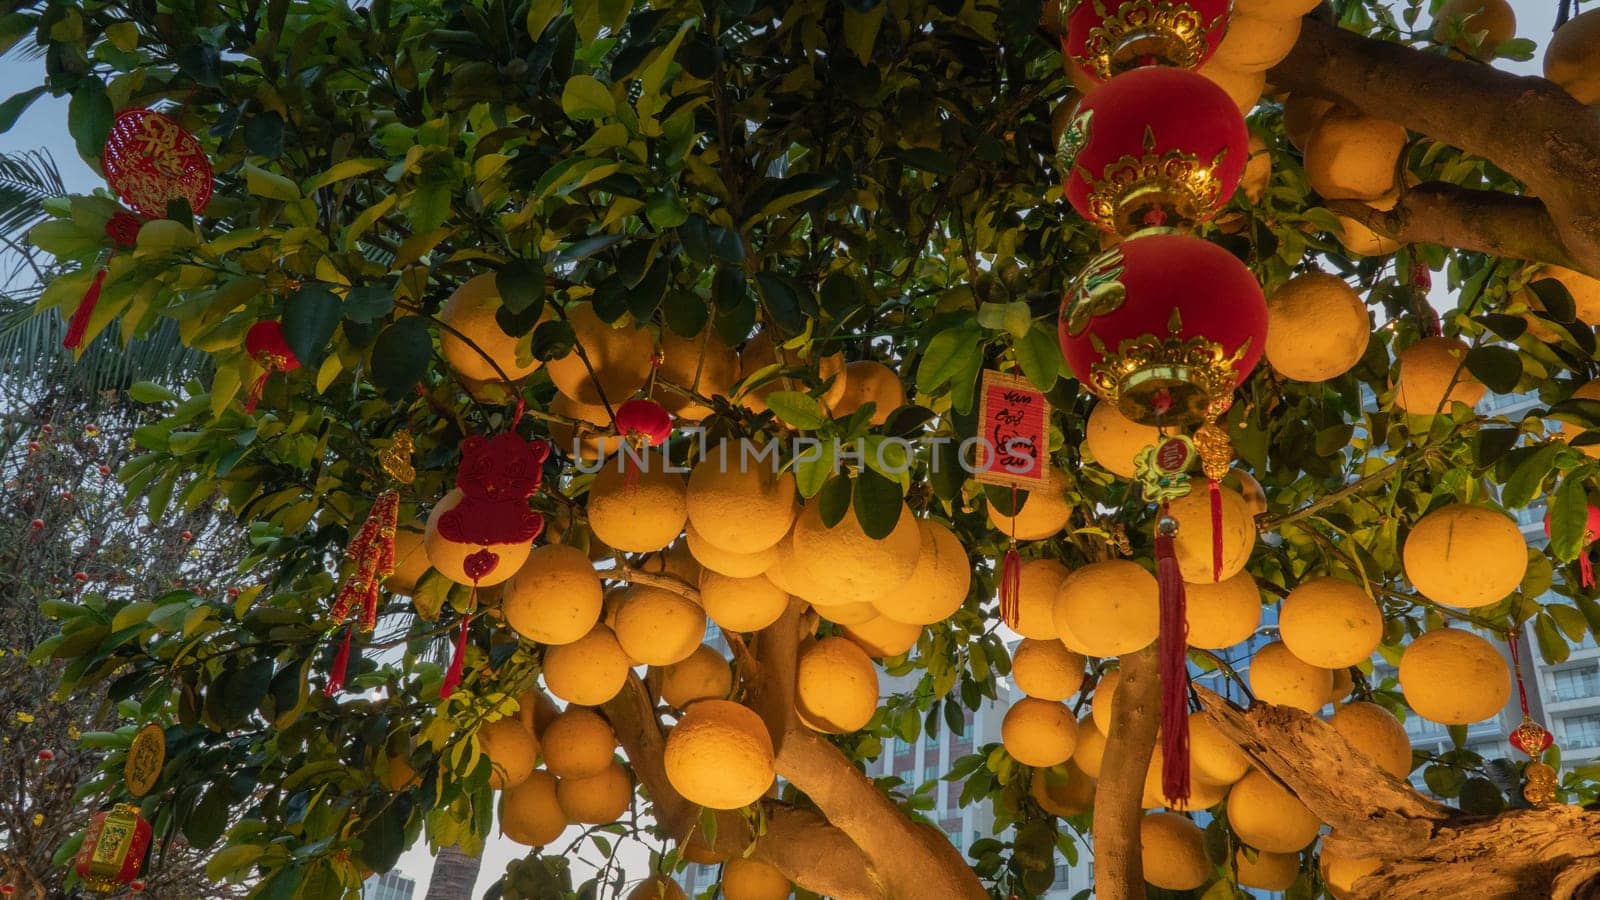 Grapefruit on a citrus tree with evening illumination and Chinese decorations. High quality photo